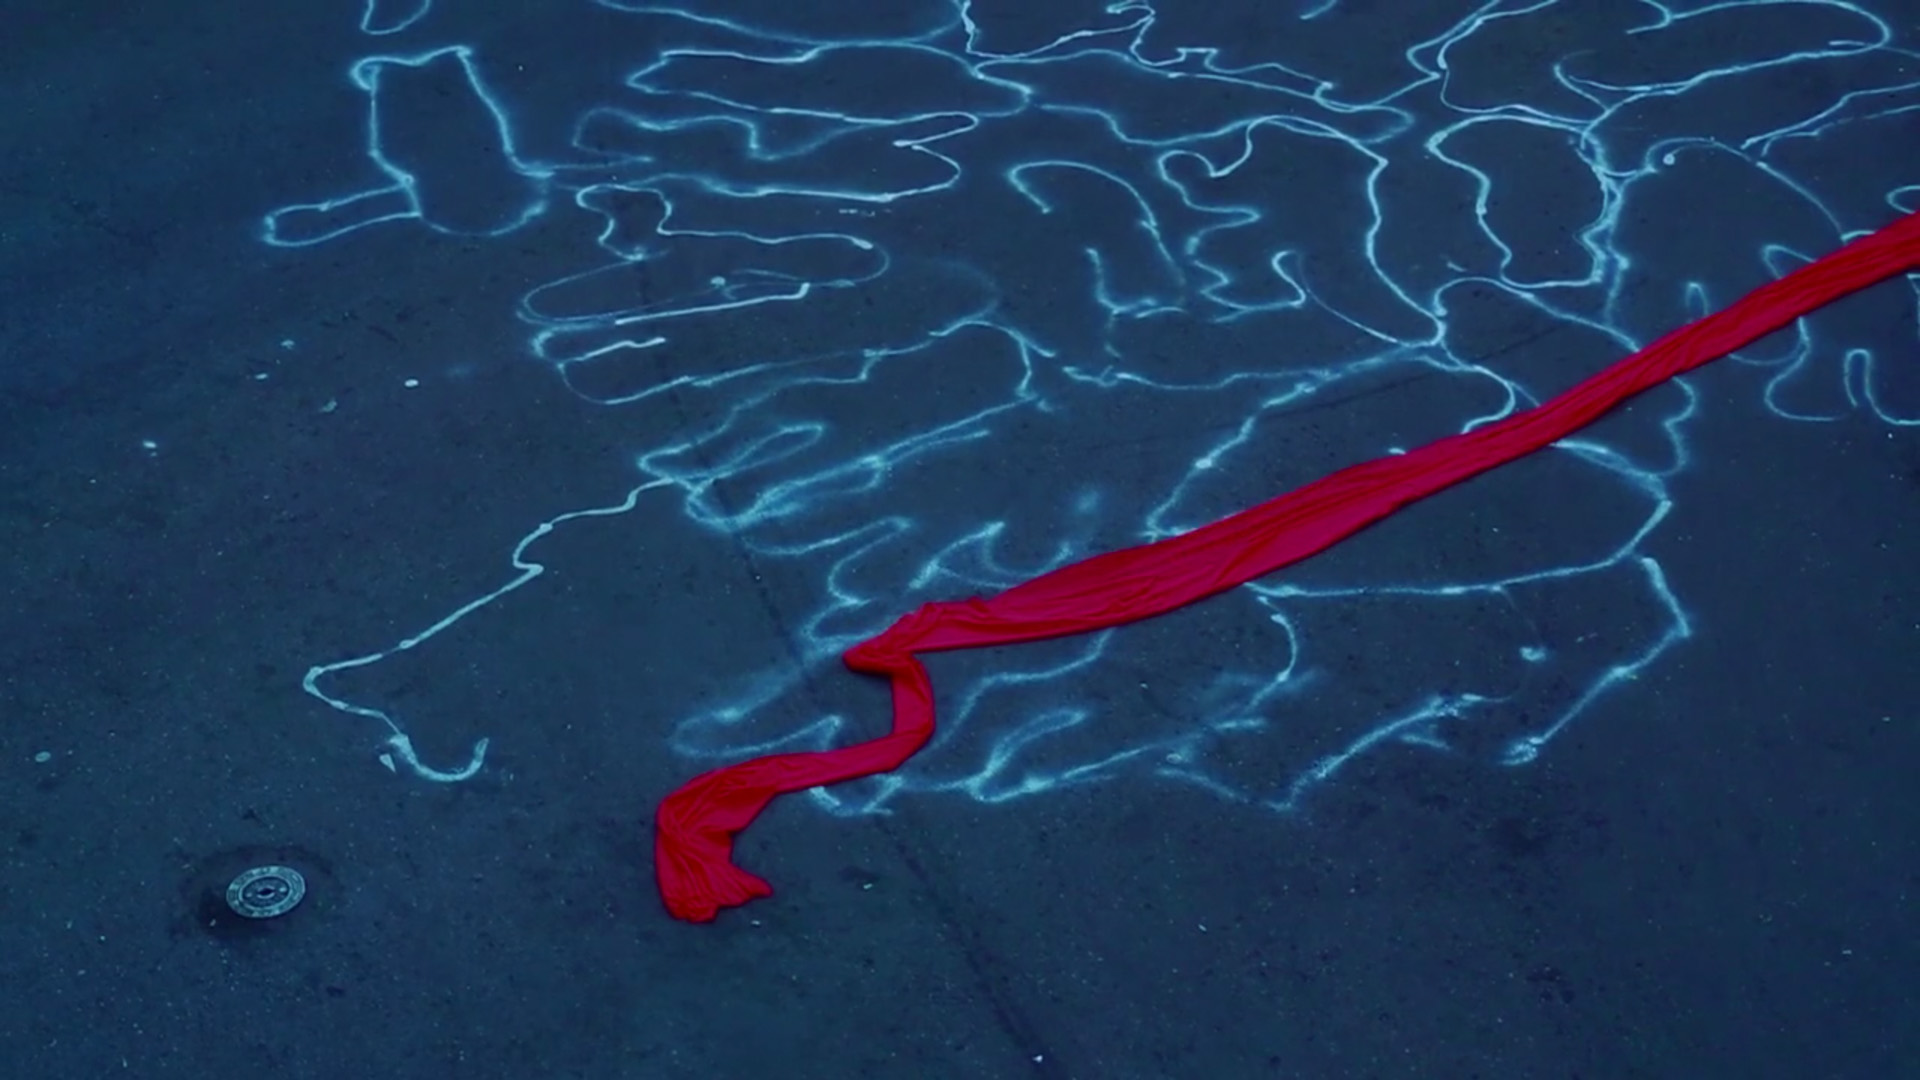 Chalk outlines on pavement with a long red scarf in a still from Blue and Red (2014) by Zhou Tao